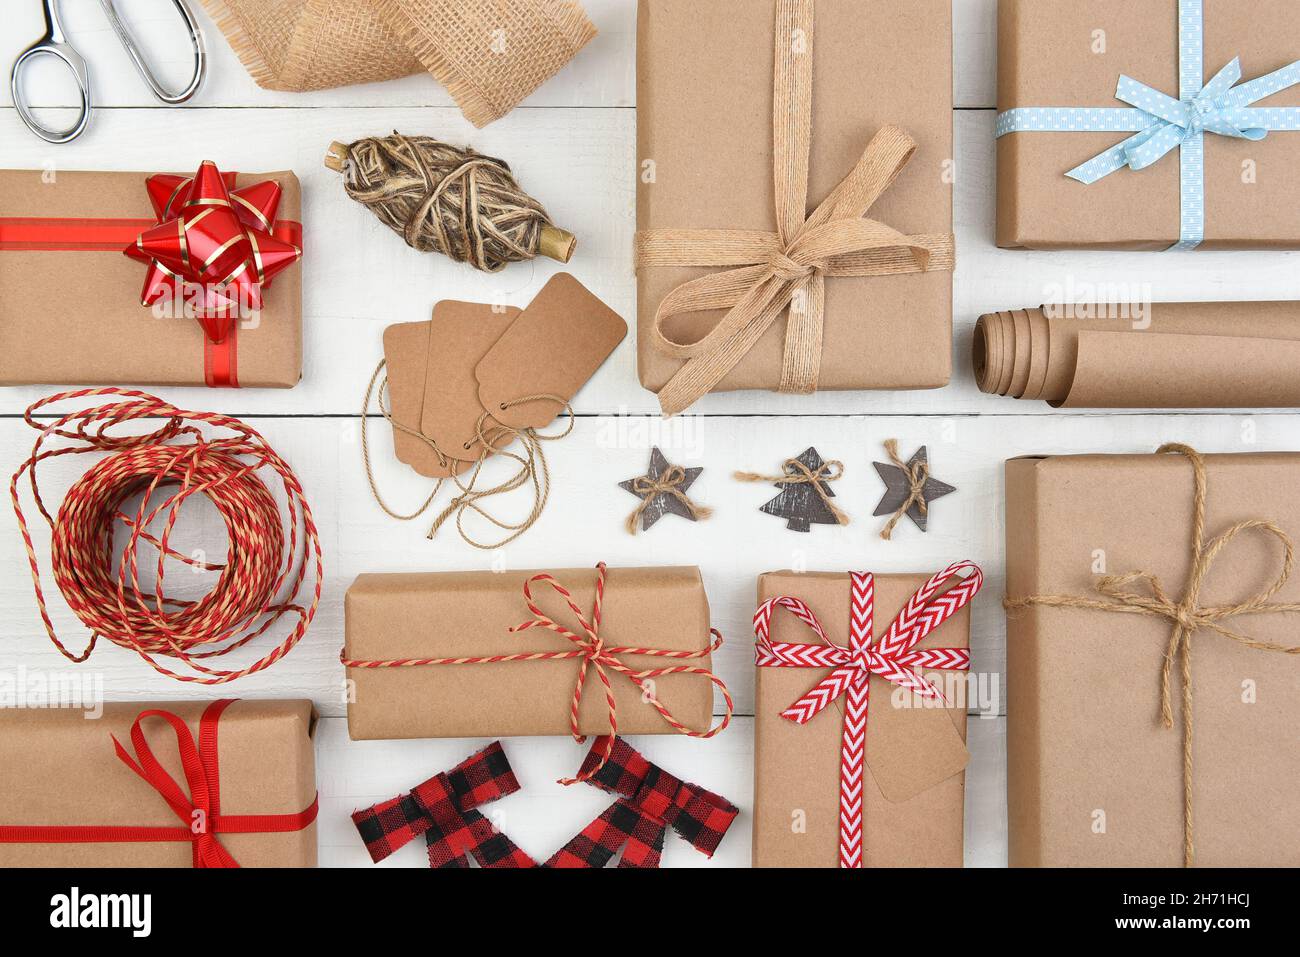 Christmas Flat Lay - Plain brown kraft paper wrapped presents with accessories filling the entire frame. Stock Photo